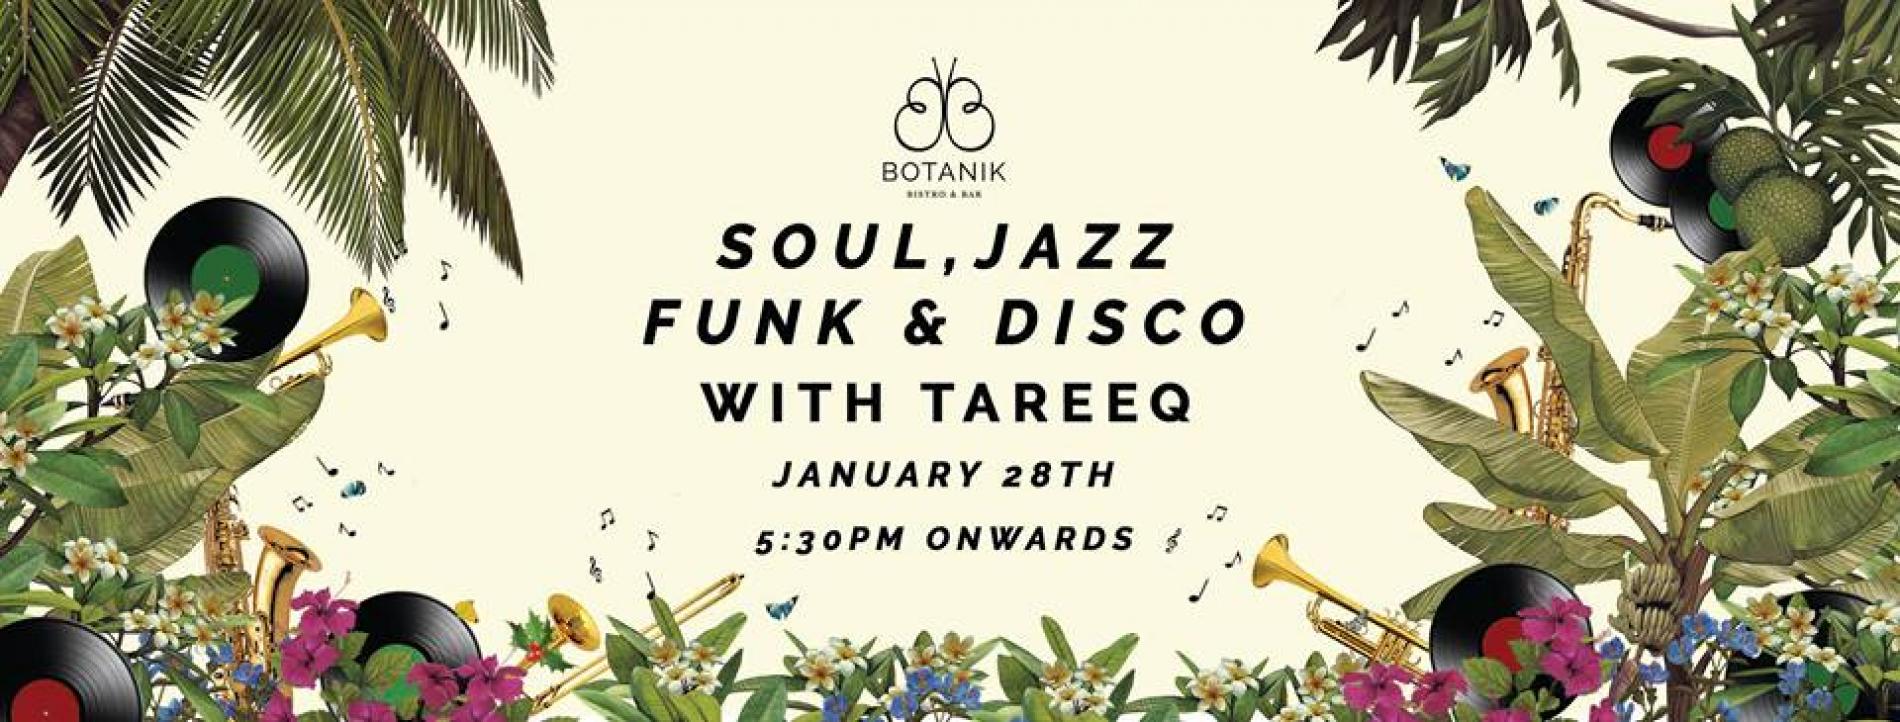 Soul Jazz Funk Disco And More With Tareeq